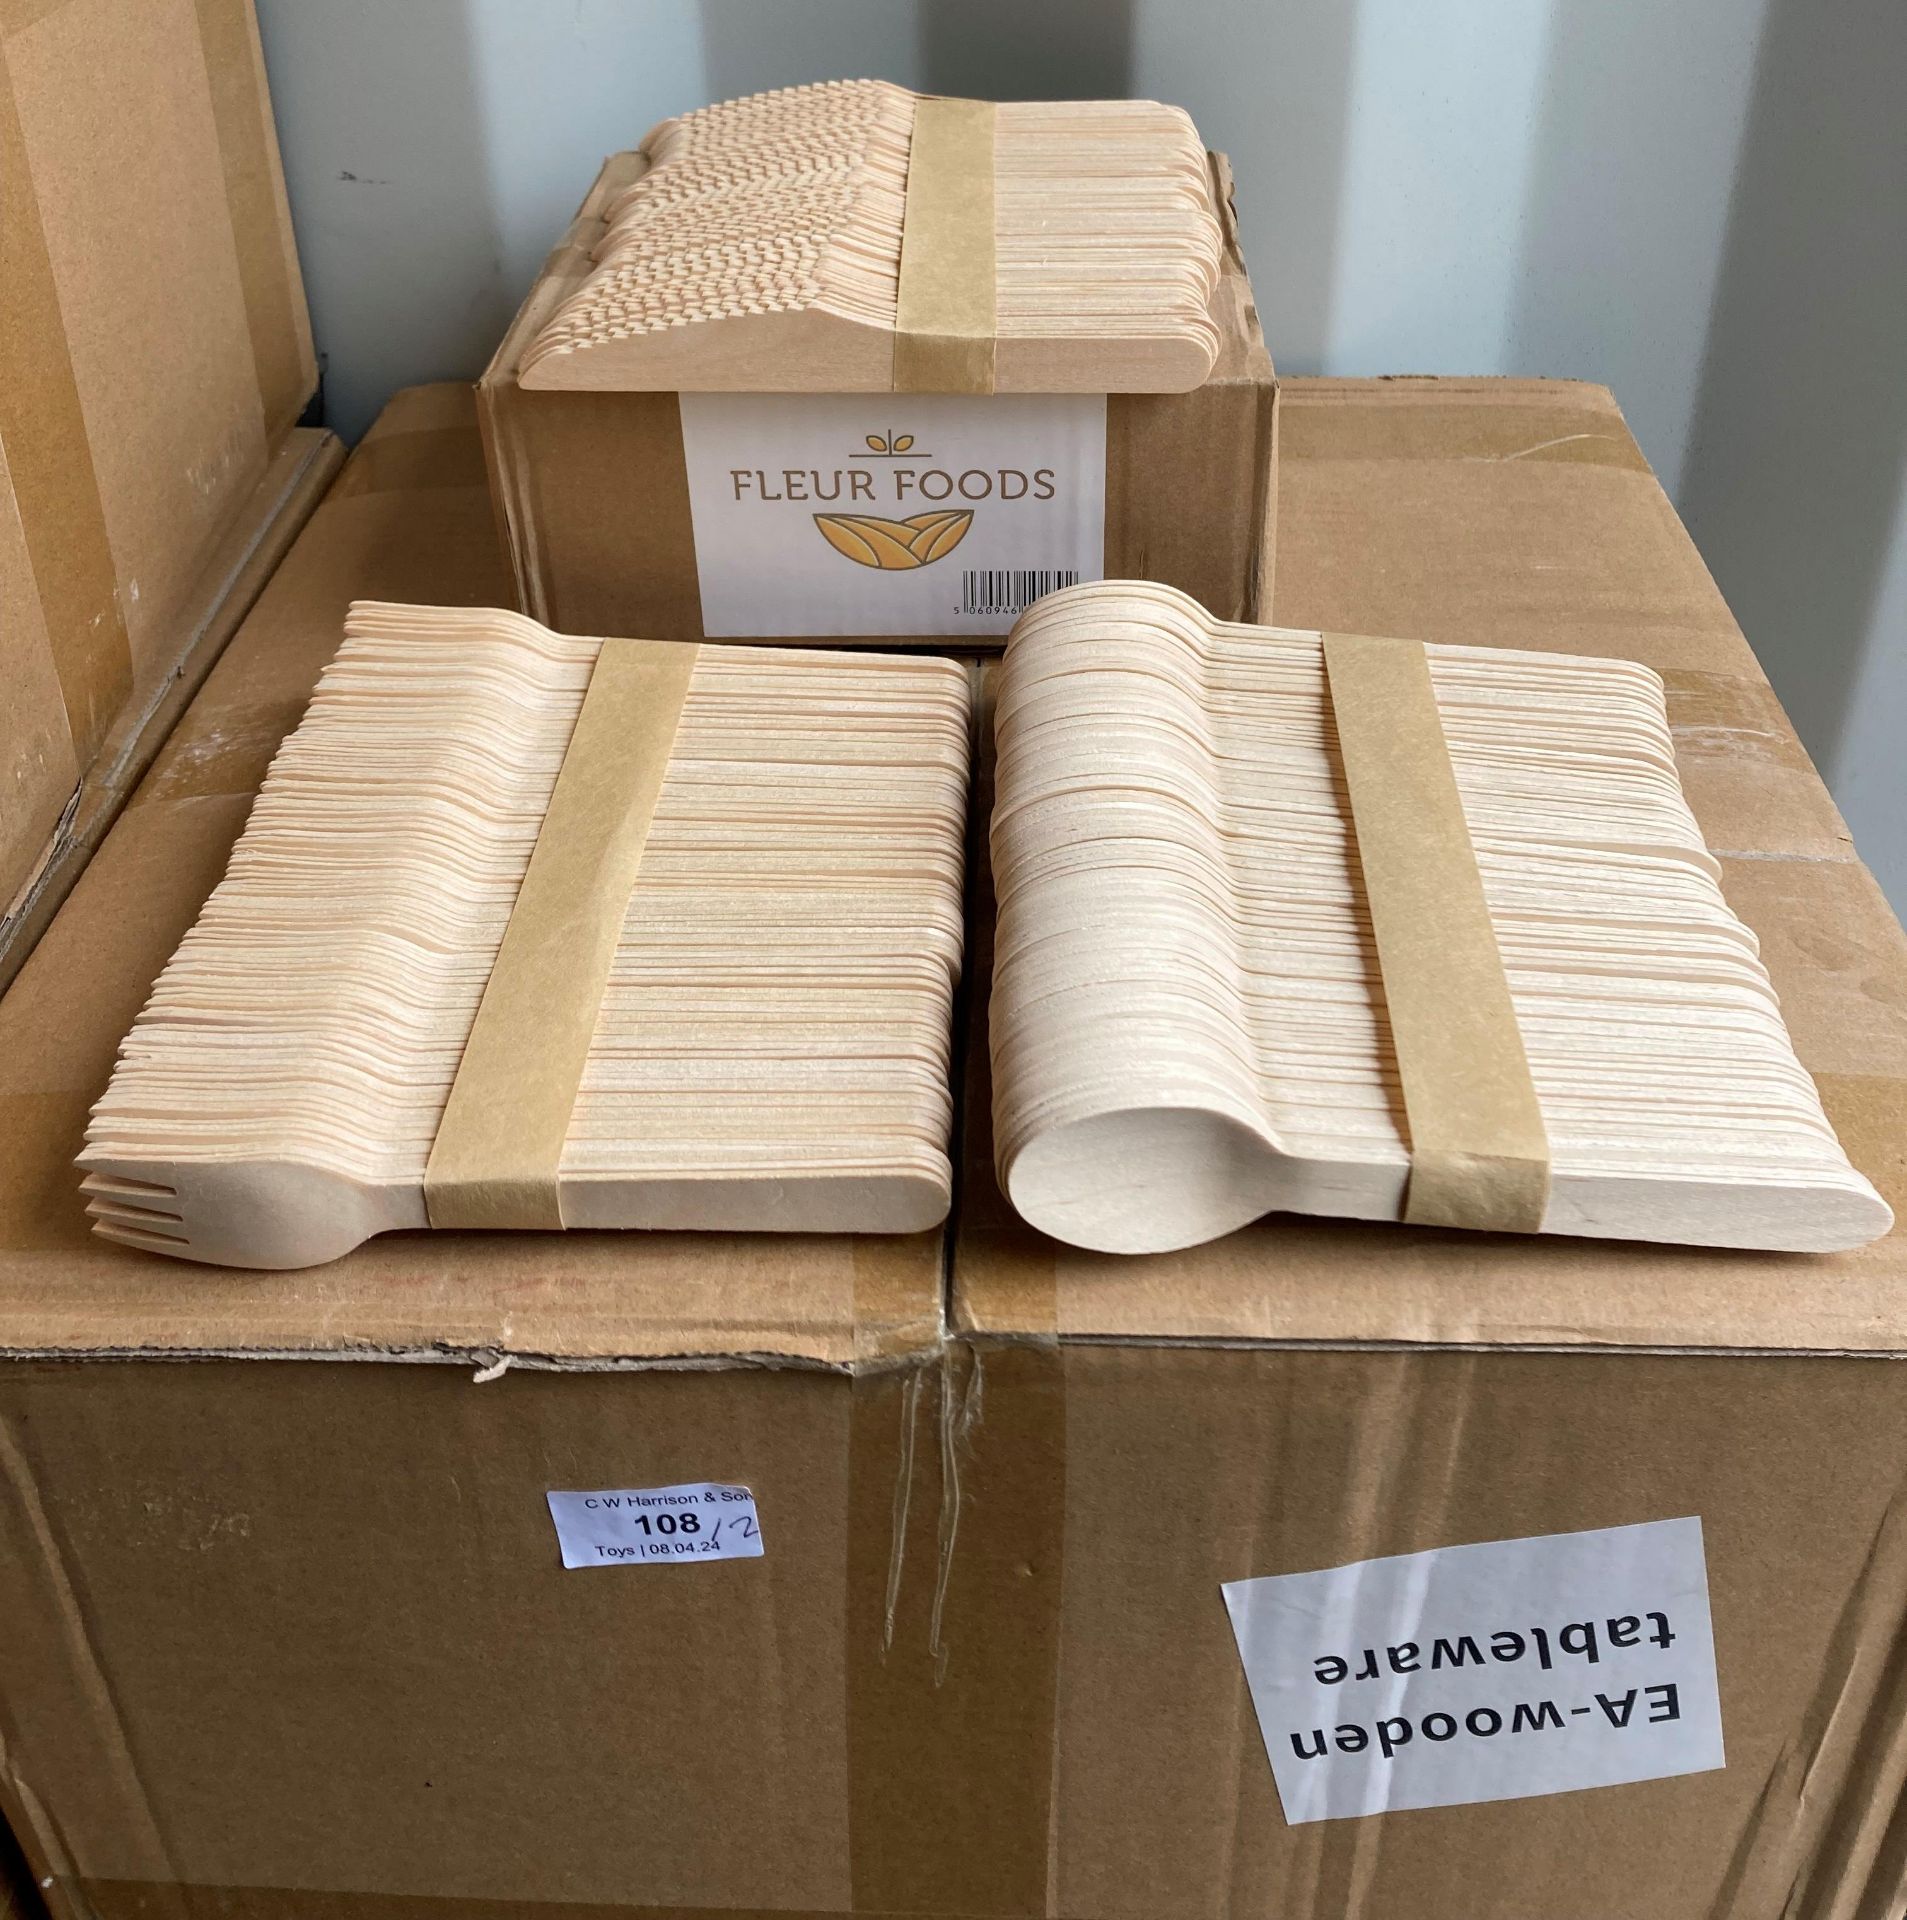 40 x Boxes of Fleur Foods Wooden Tableware - sets include 100 x knives, - Image 2 of 2